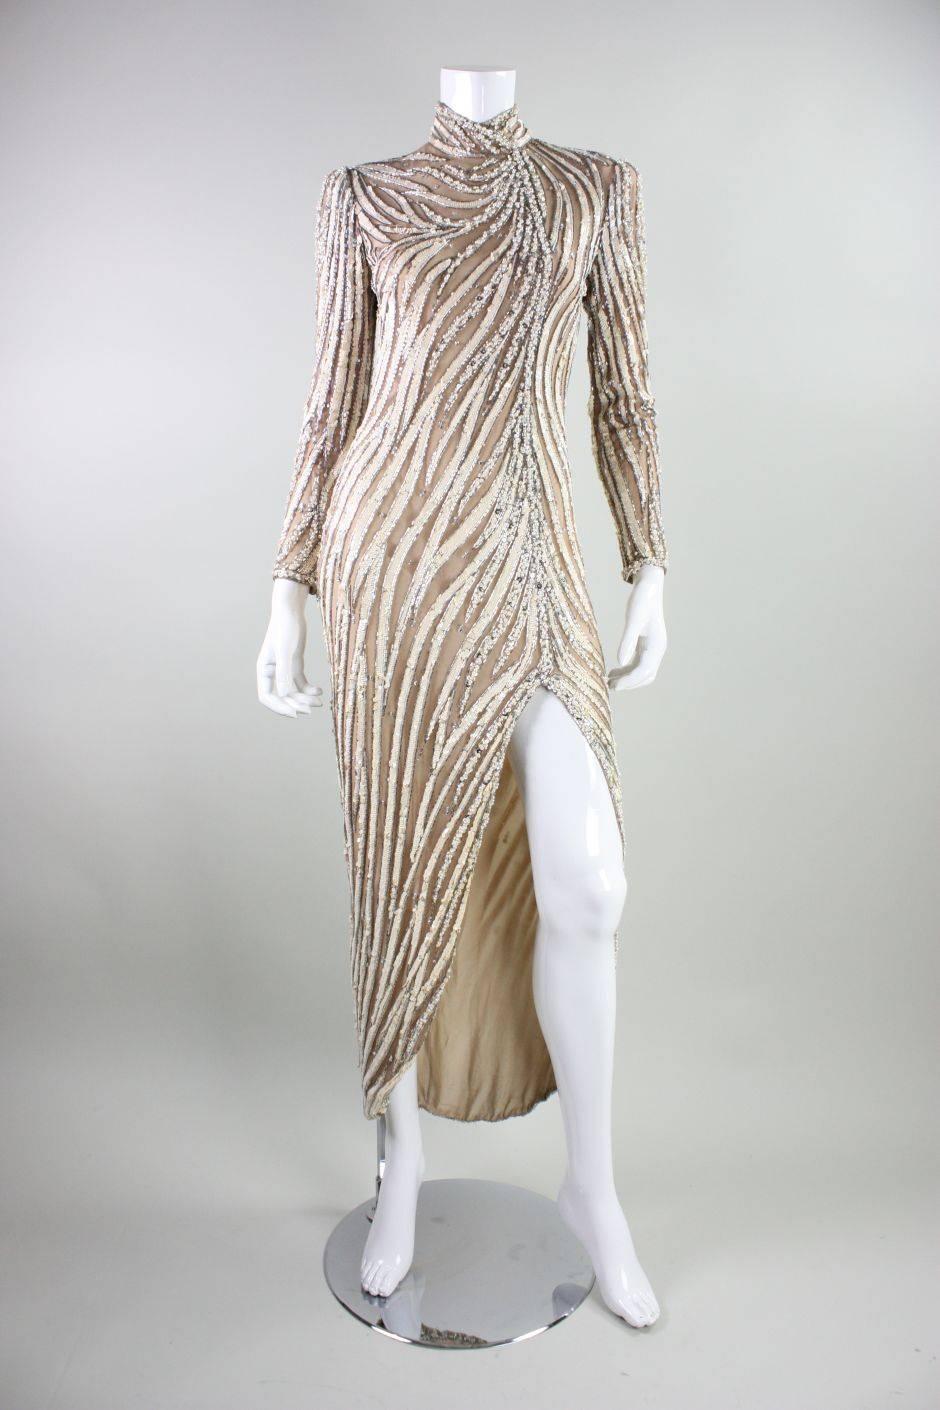 Vintage evening gown from Bob Mackie dates to the 1980's and is made of nude stretch netting that is adorned with sinuous bands of silver bugle beads, cream sequins, and pearls.  Gown has long sleeves with zippered cuffs, a mock neck, and is fitted